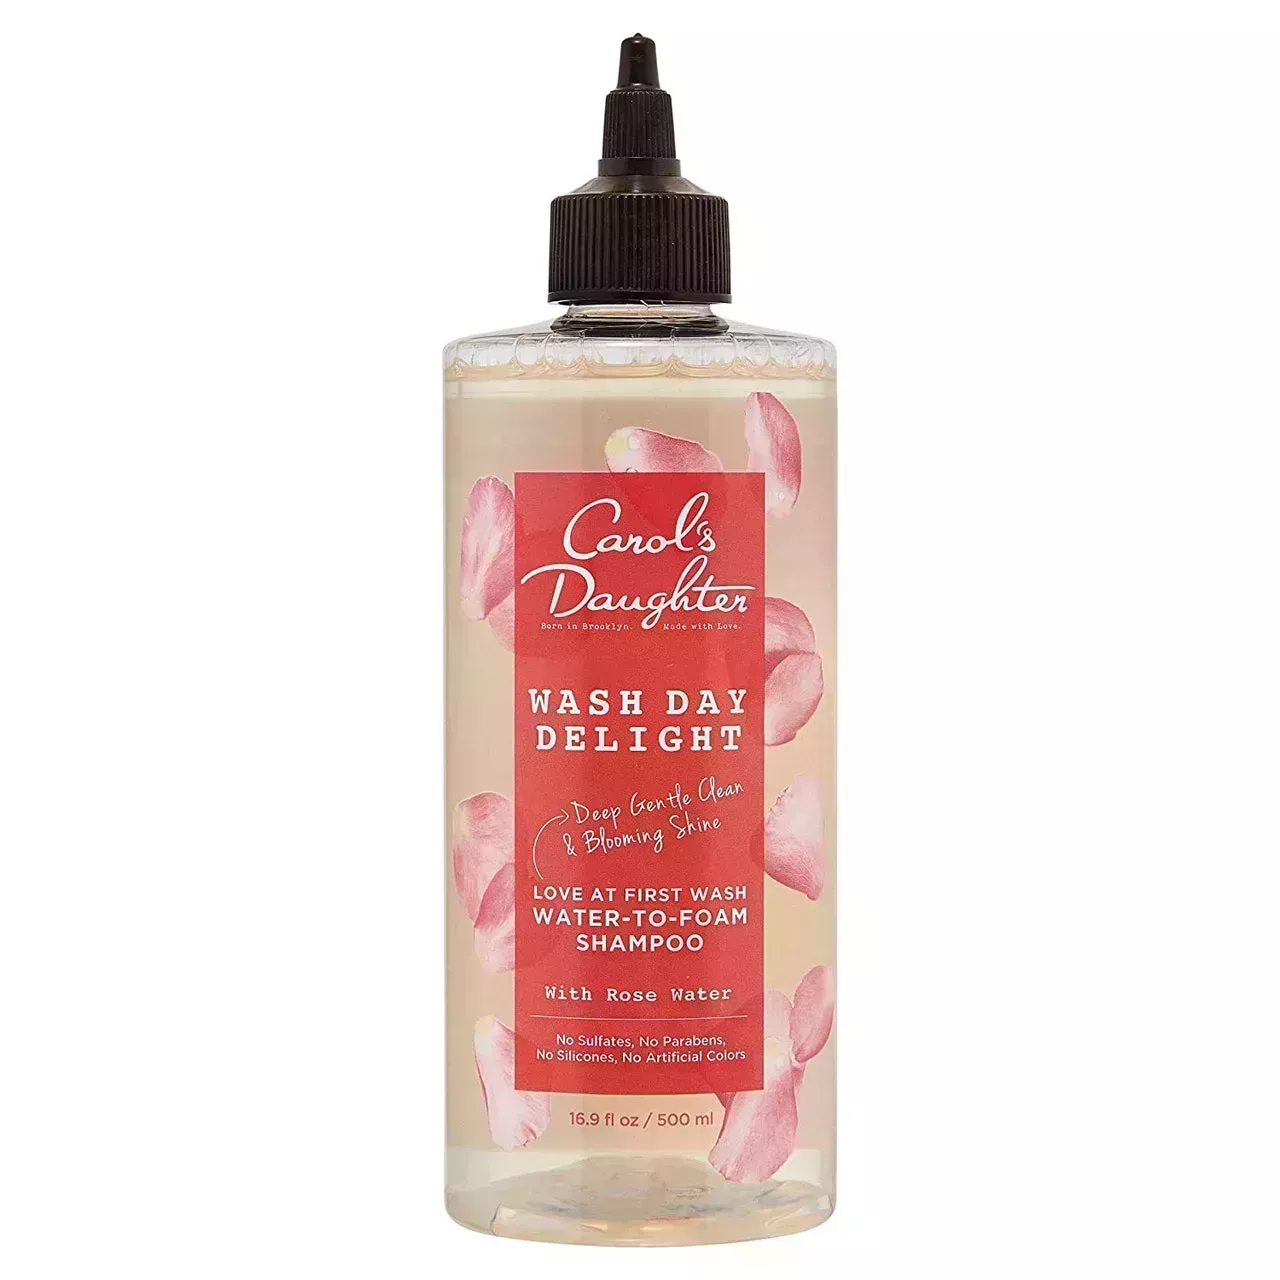 bottle of carols daughter wash day delight water to foam shampoo with rose water on a white background